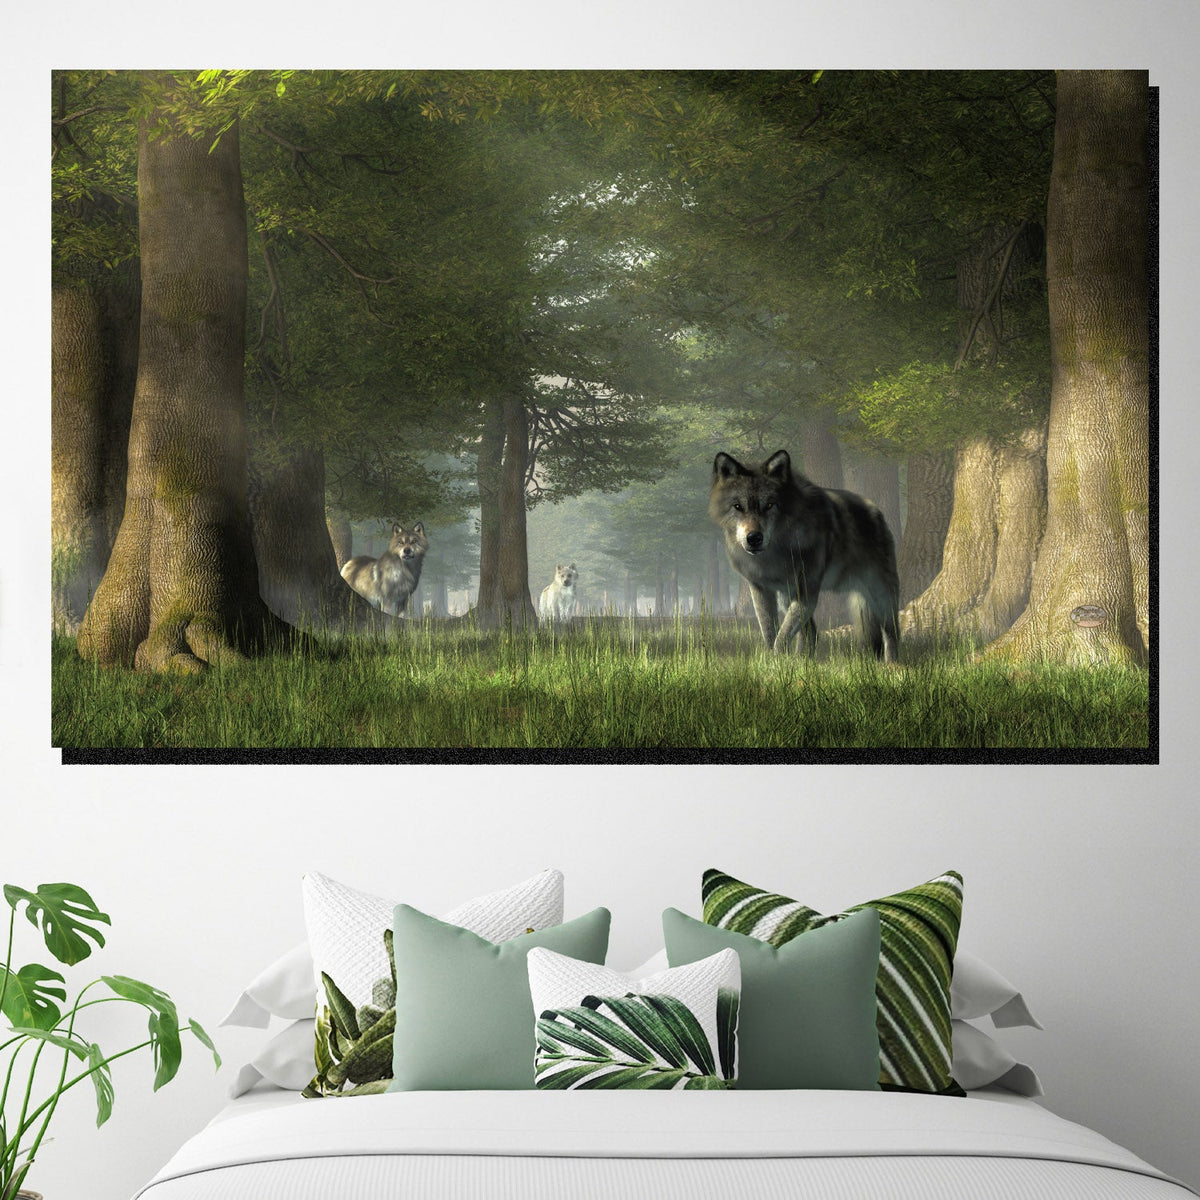 https://cdn.shopify.com/s/files/1/0387/9986/8044/products/WolfPackCanvasArtprintStretched-1.jpg